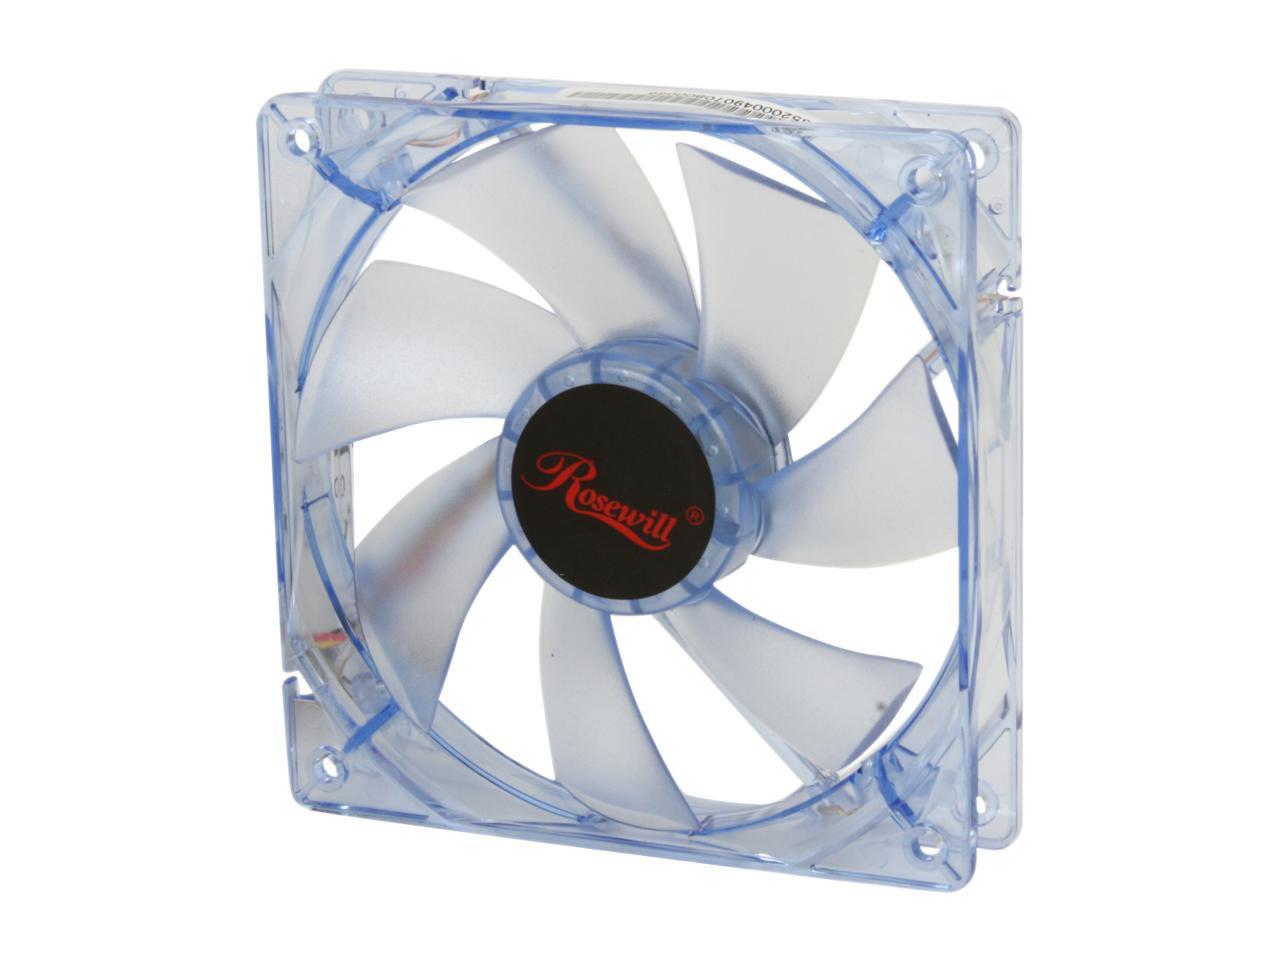 Rosewill RFA-80-RL 80mm 4 Red LED Case Fan